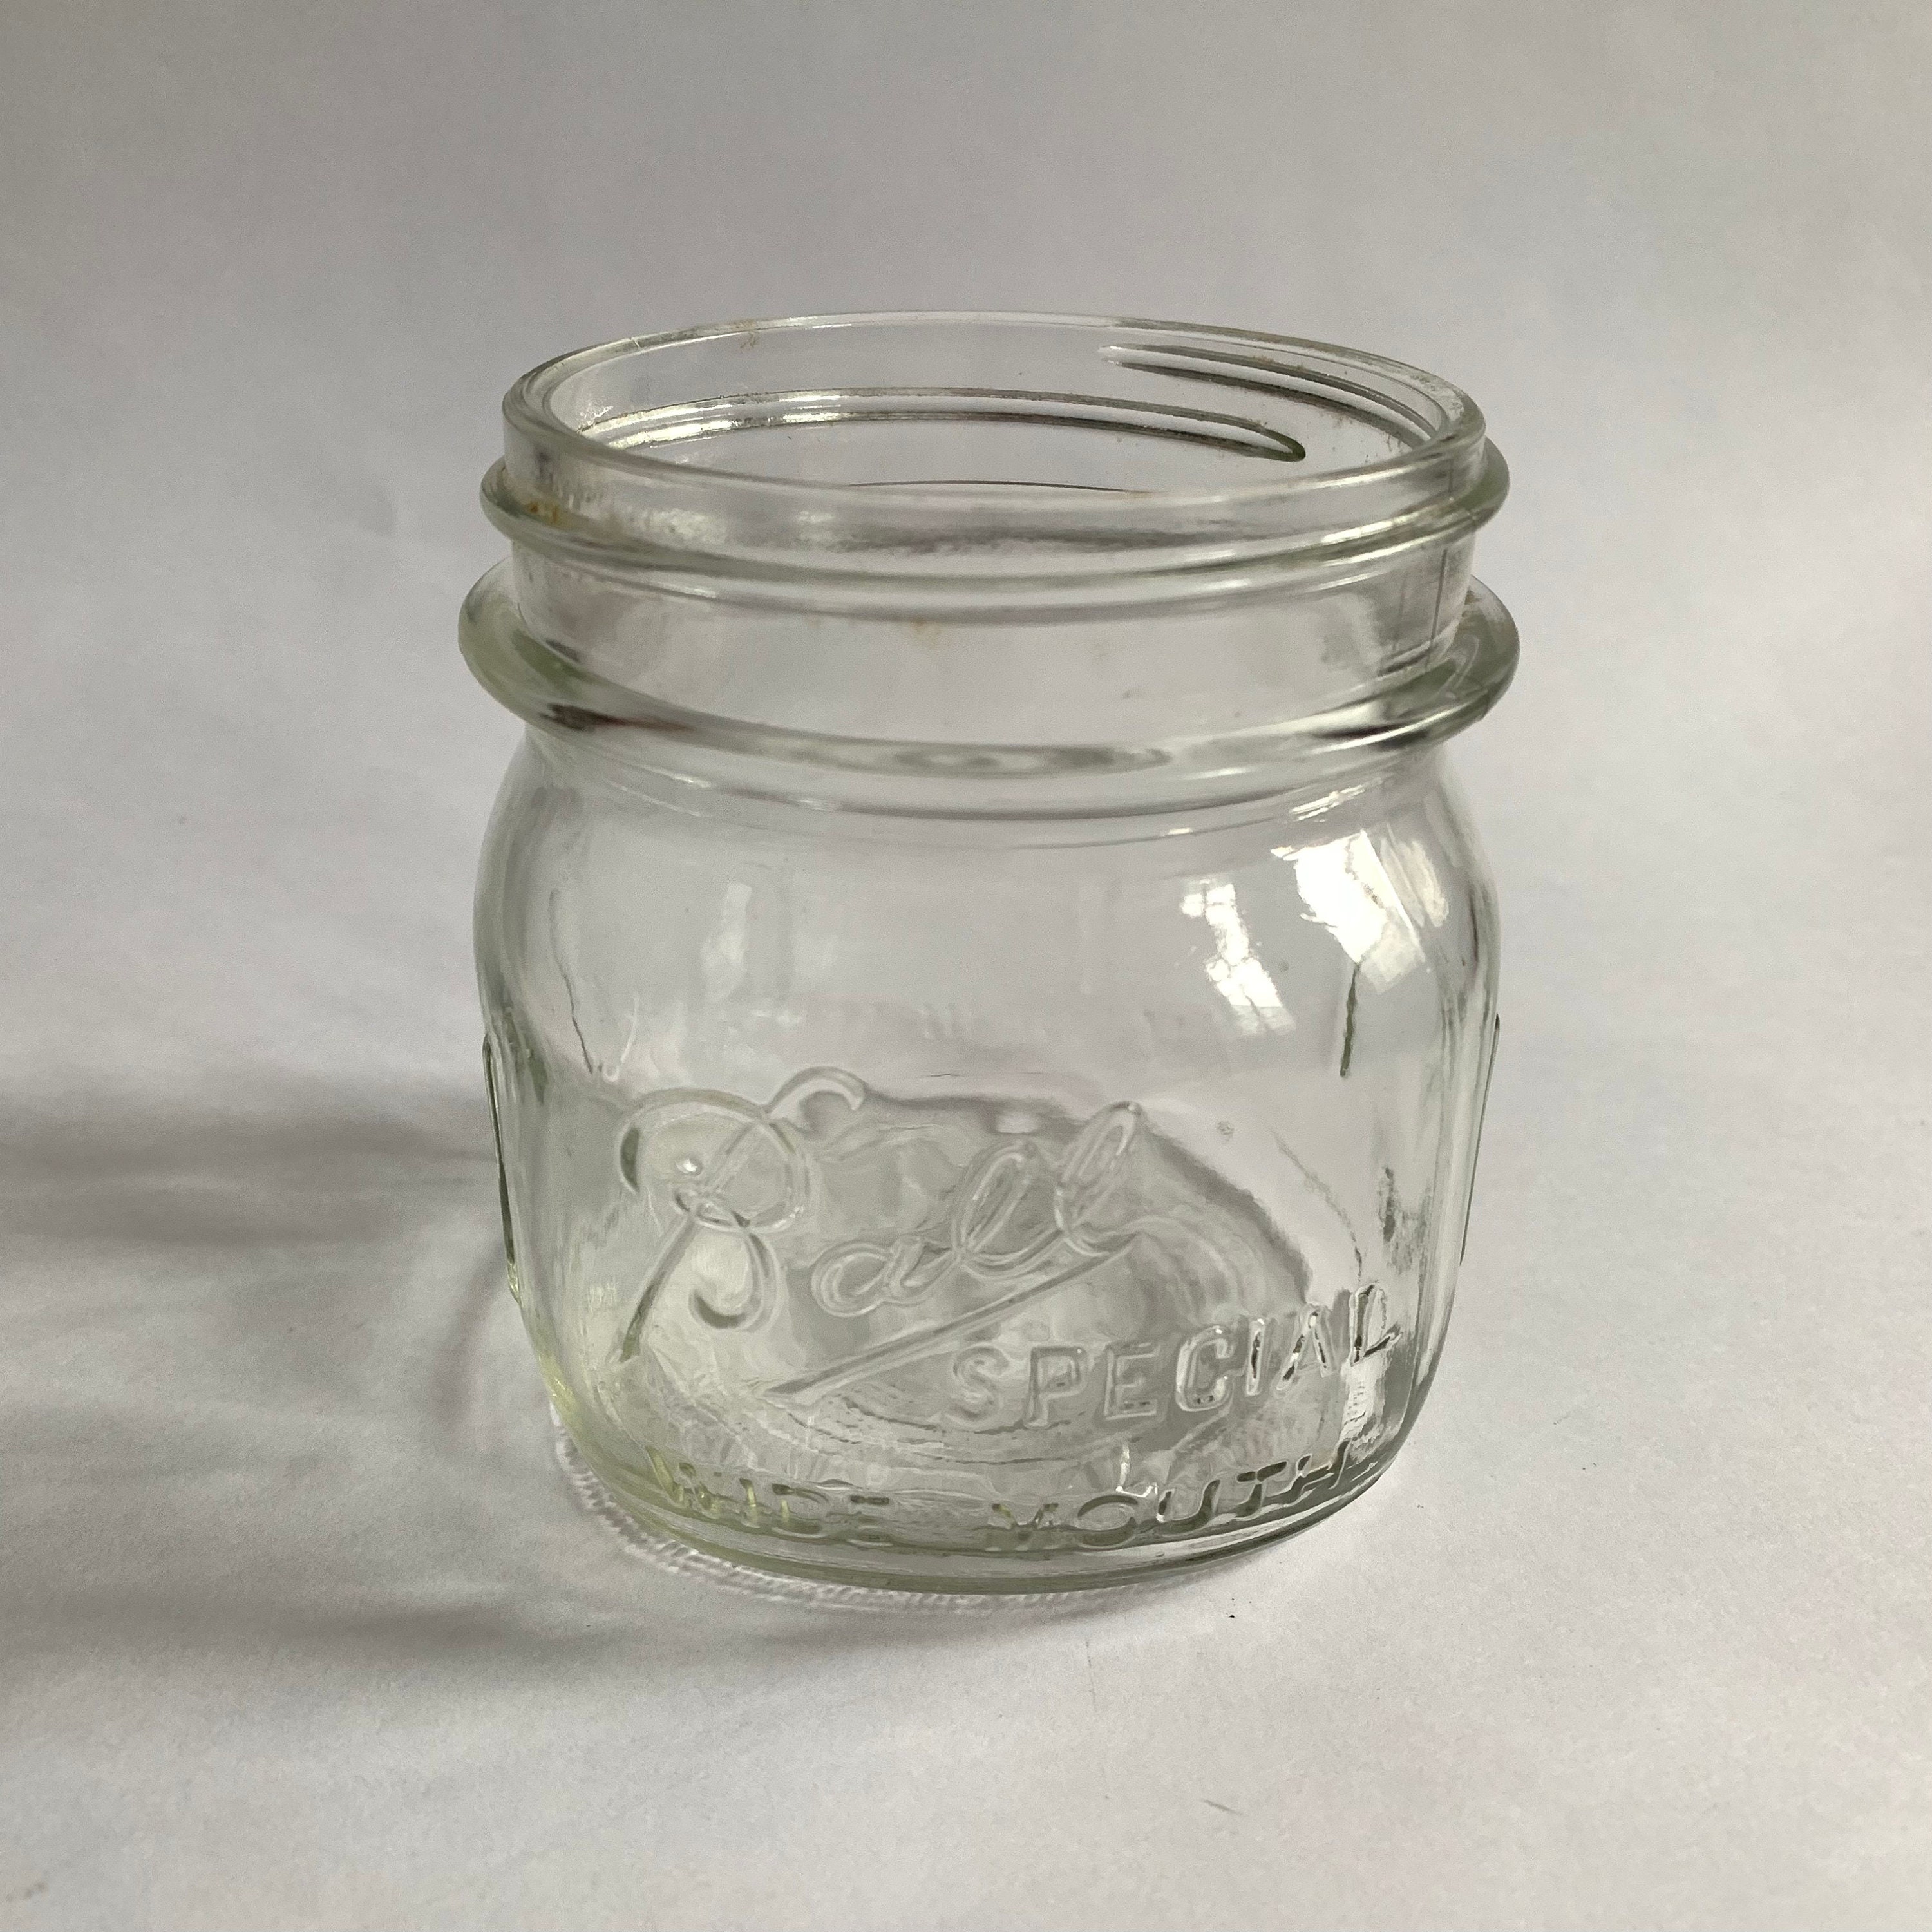 Glass Snack Jar 2.0L , Cookies Biscuits Treats Jar for Home, Housewarming  Gift, Wide Mouth Jar, Airtight Seal, Gift Ideas for Christmas 